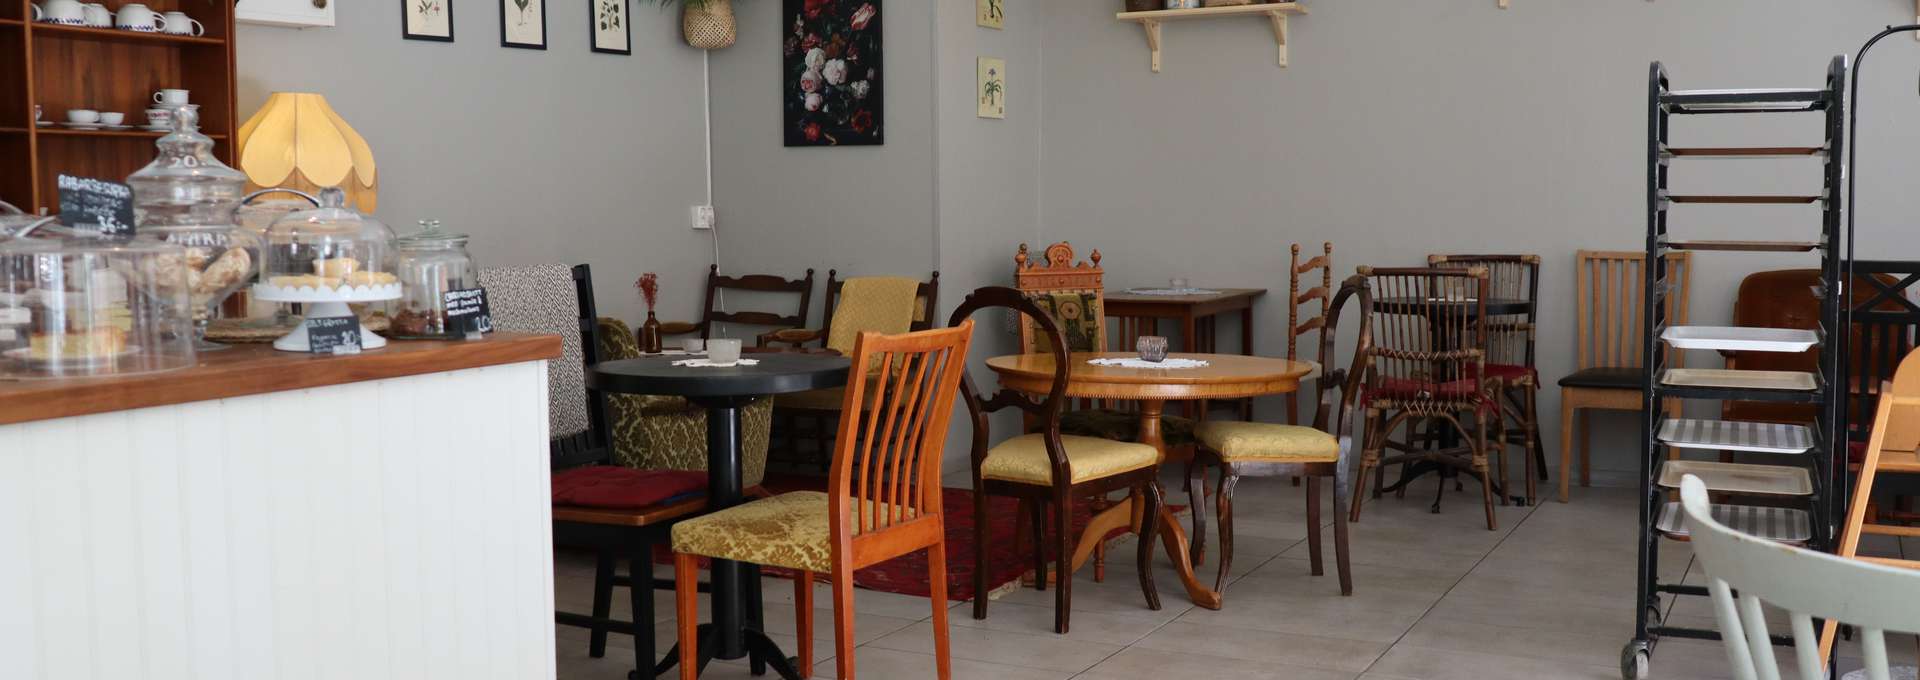 the interior of a small cafe with a counter, tables and chairs in an older style